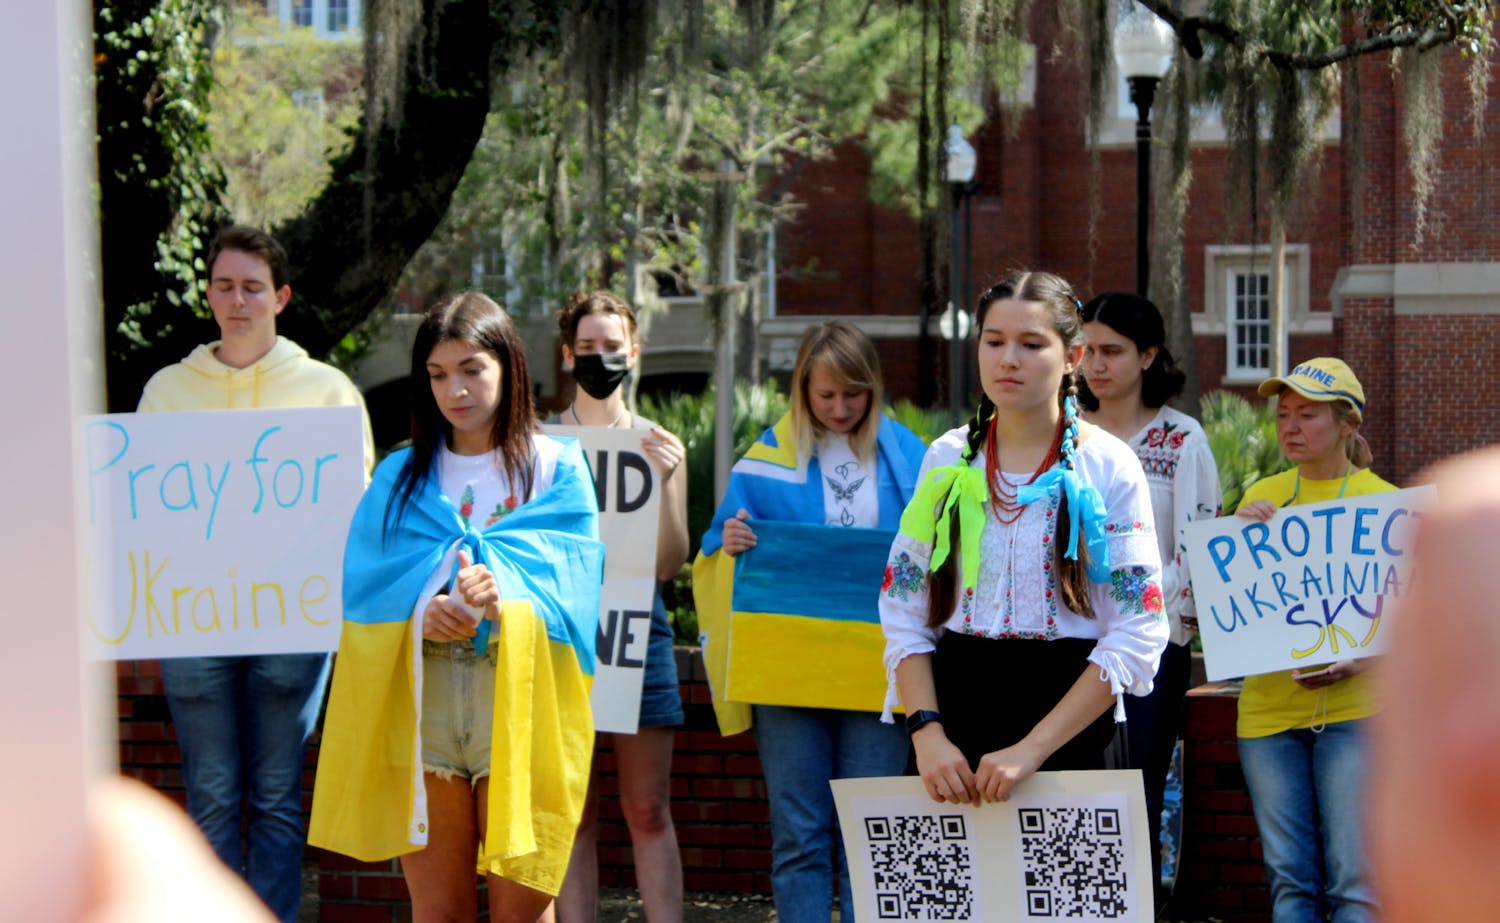 Members of the UF and Gainesville community gathered for a rally in support of Ukraine during its ongoing invasion by Russia. The peaceful demonstration began at Turlington Plaza and ended at Plaza of the Americas on Thursday, March 3, 2022.&nbsp;